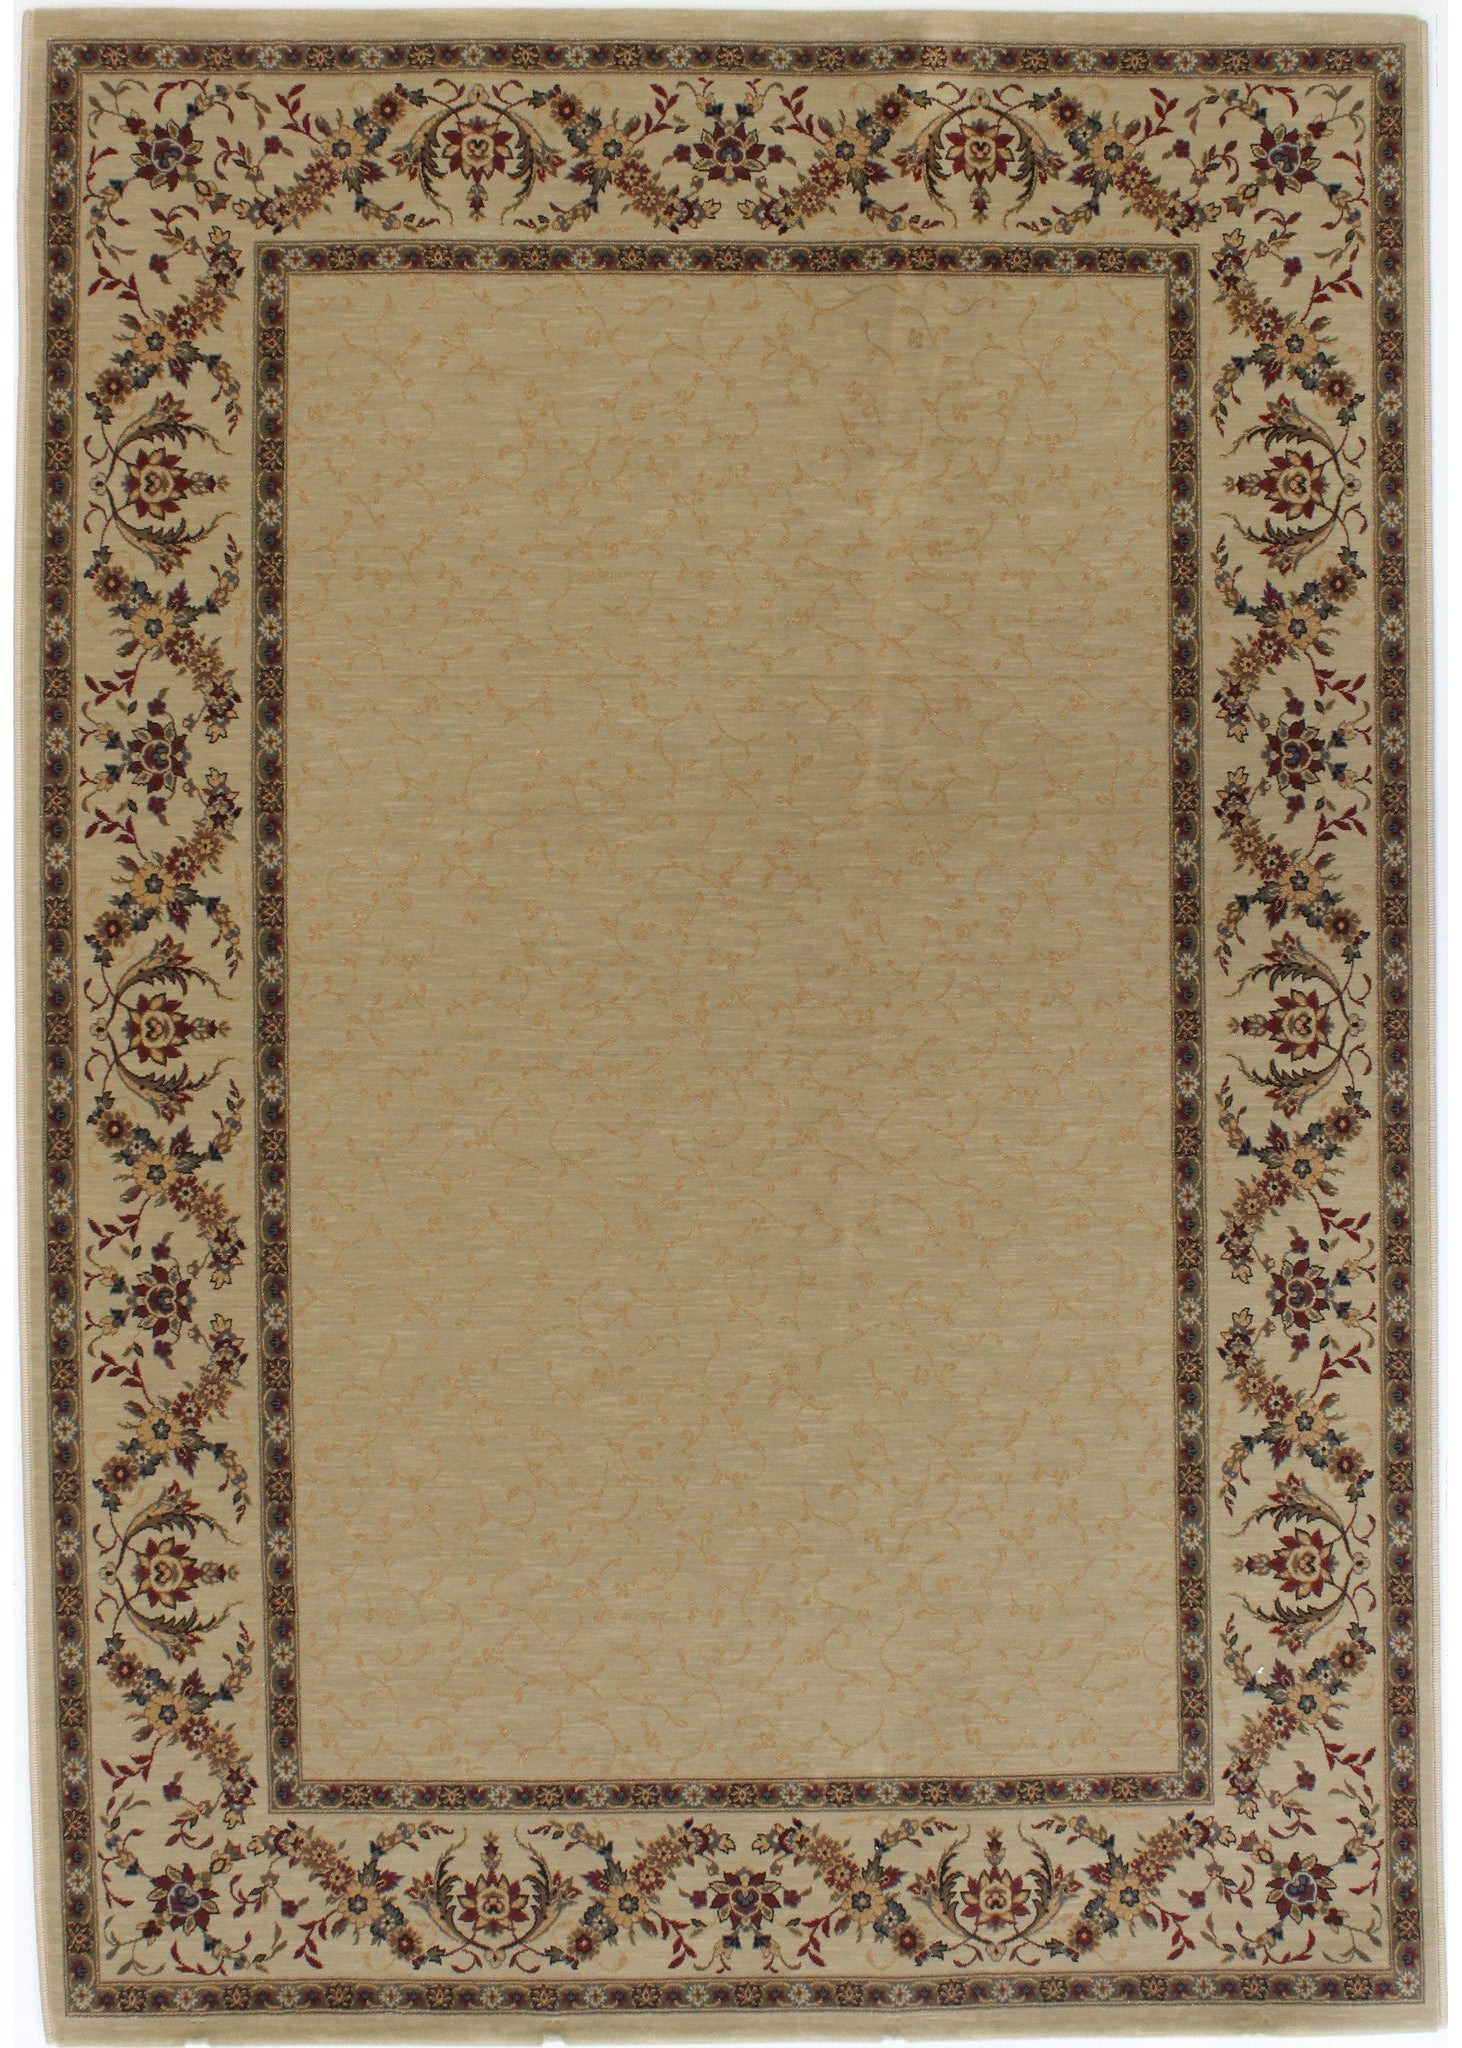 Area rug for living space and any room. Floor decor, rugs and carpets from Tabrizi Rugs. Kenouz 170 L Green - 5'3